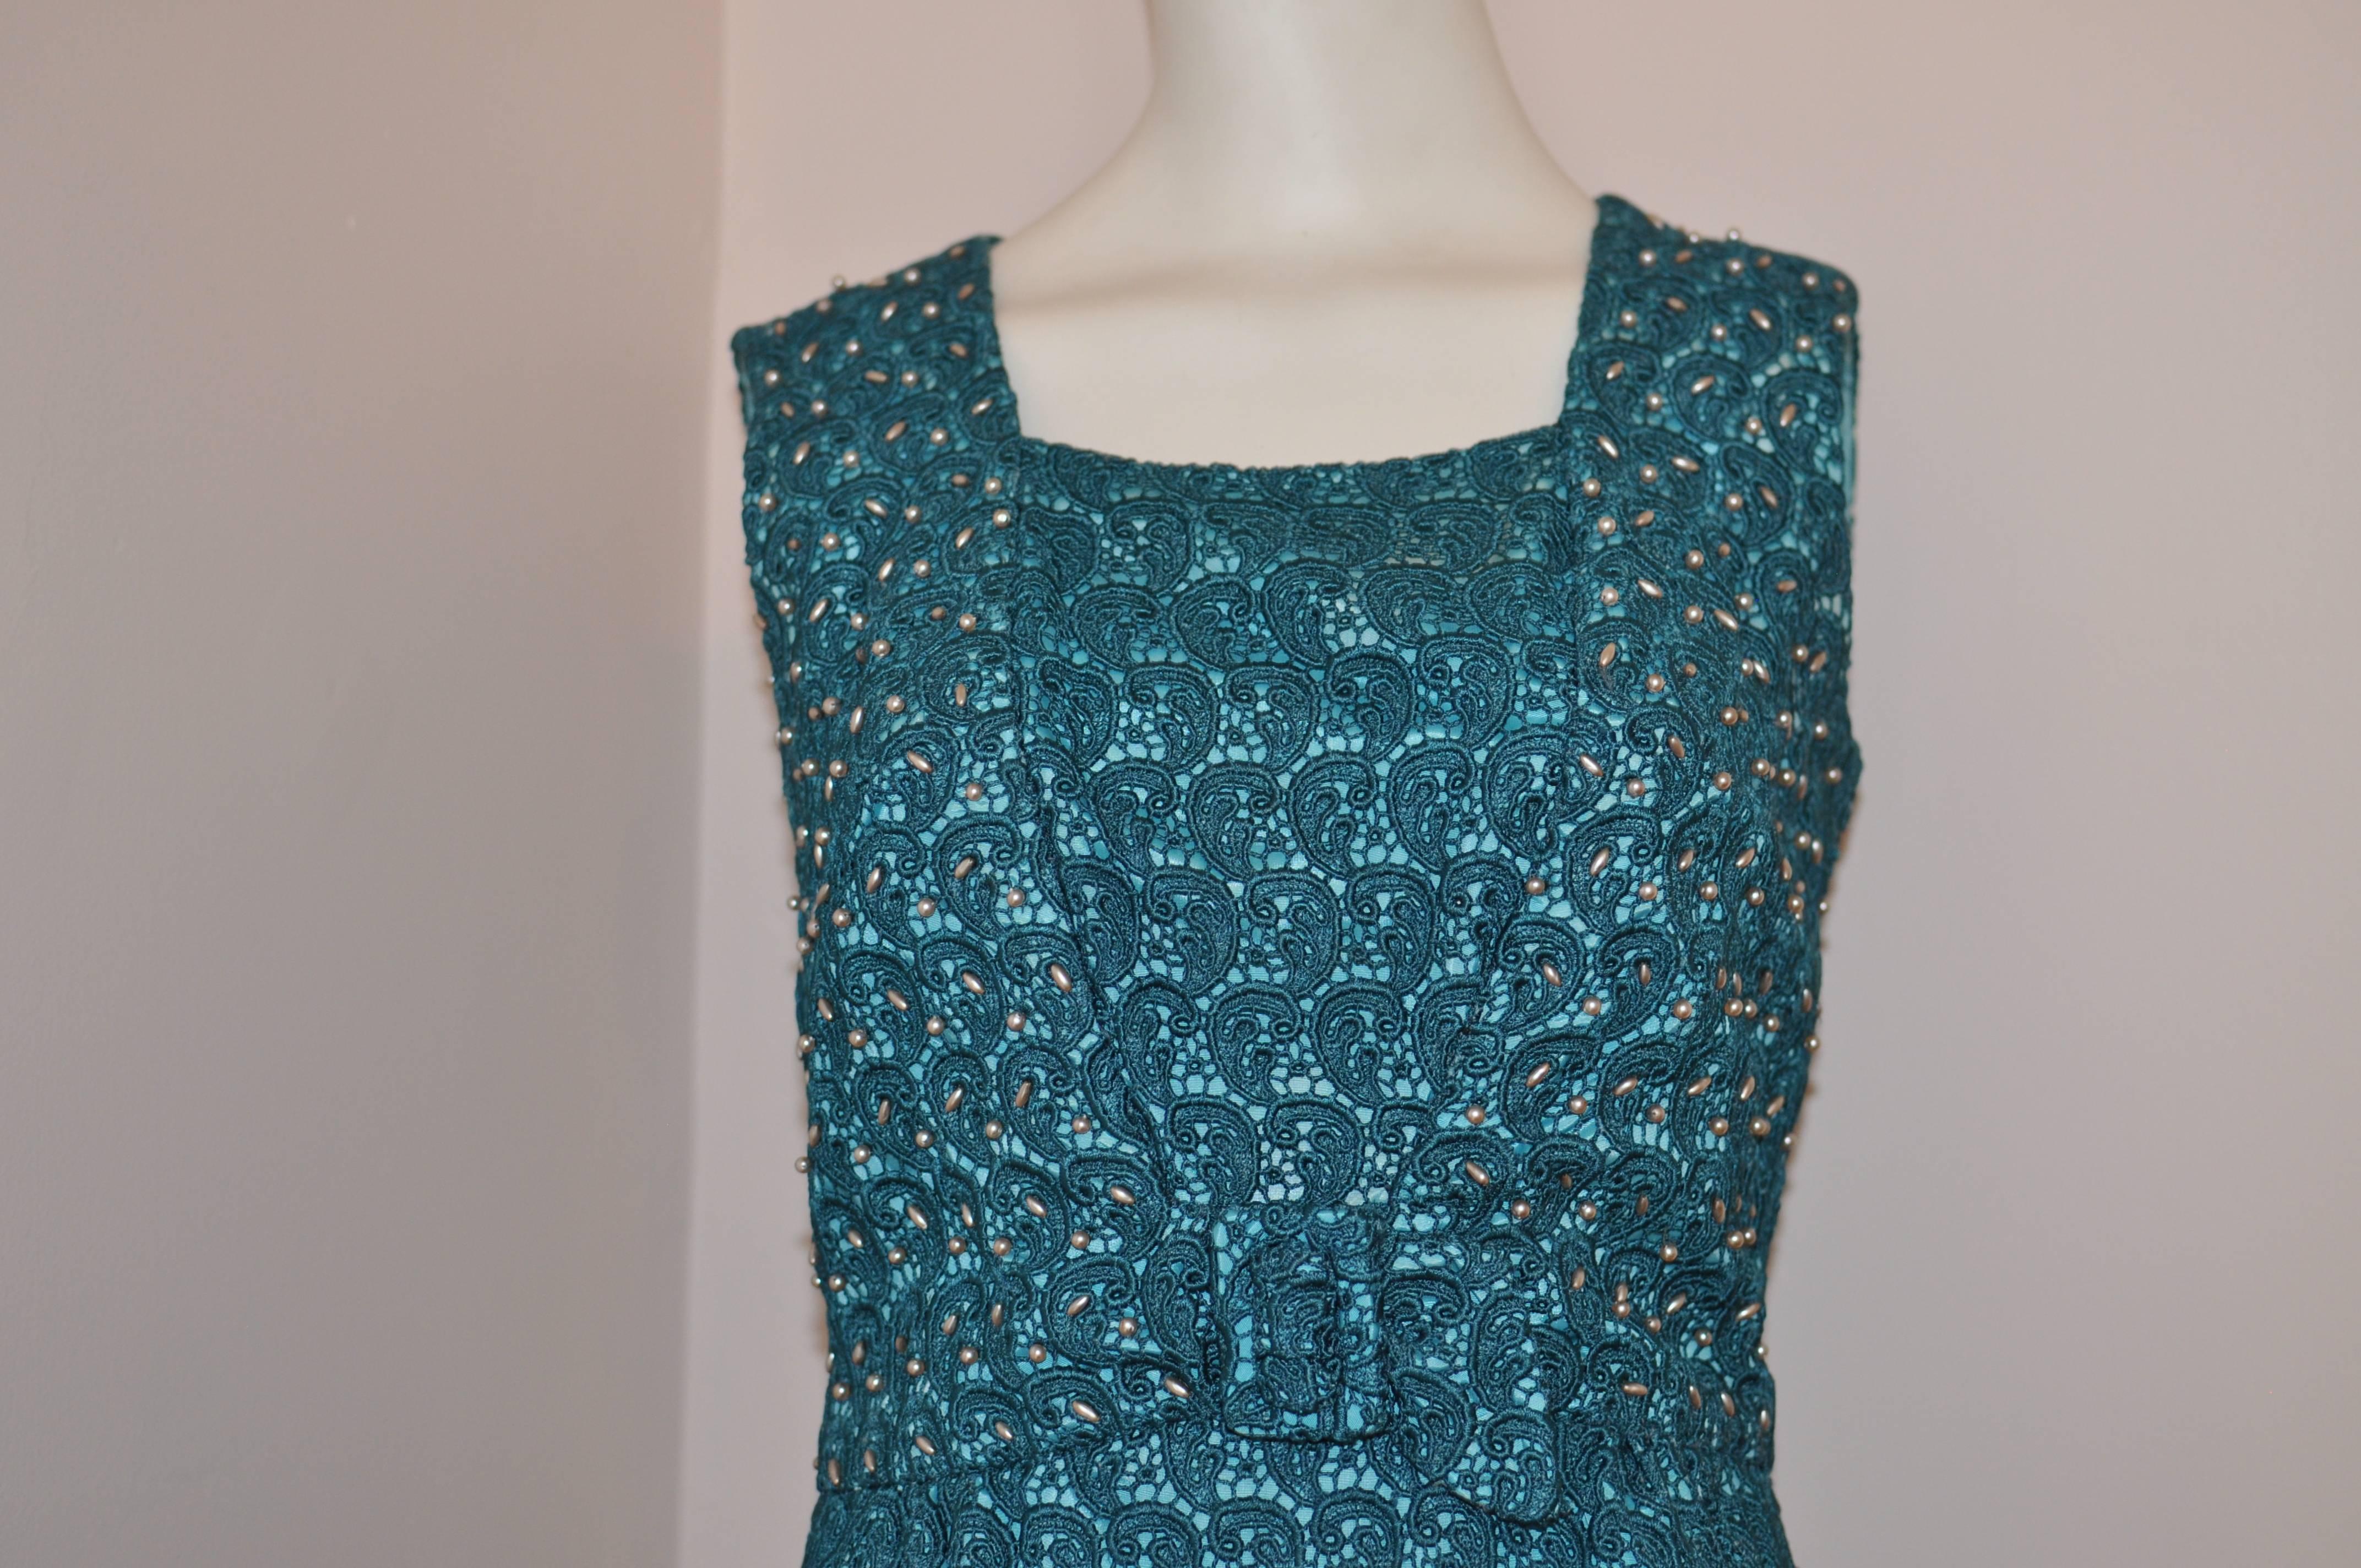 Wonderful example of a 1960s cocktaill dress with a paisley scalloped lace design an attached belt with buckle which can be adjusted, and see pearls at top and bottom.

This dress is in great condition with some discoloration on the lining.